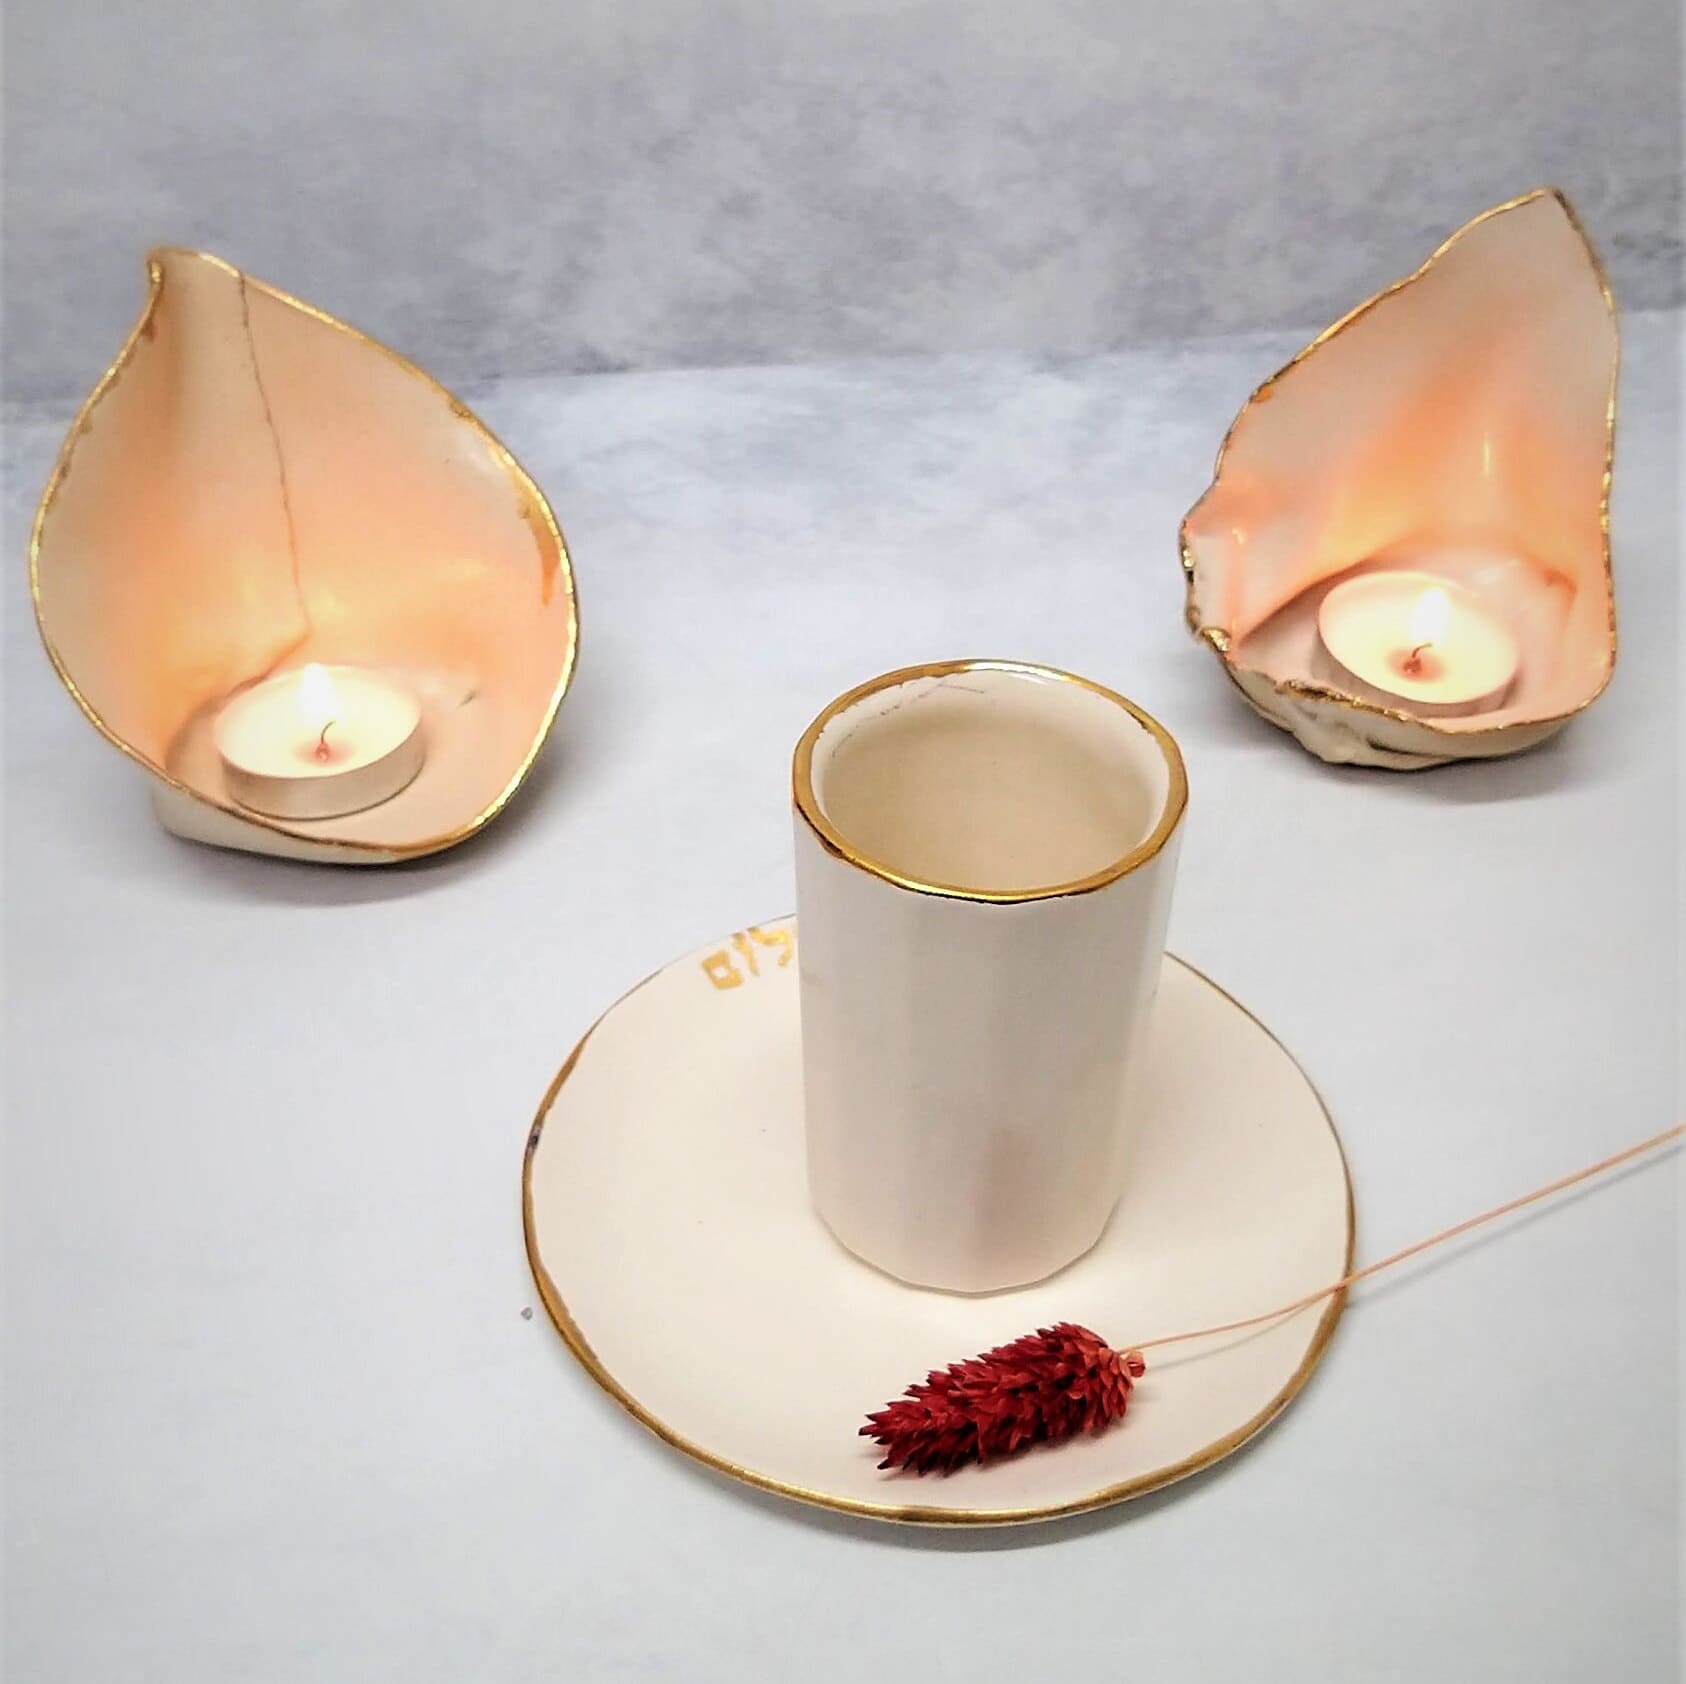 Ceramic candlesticks with gold rim and cup for kiddush